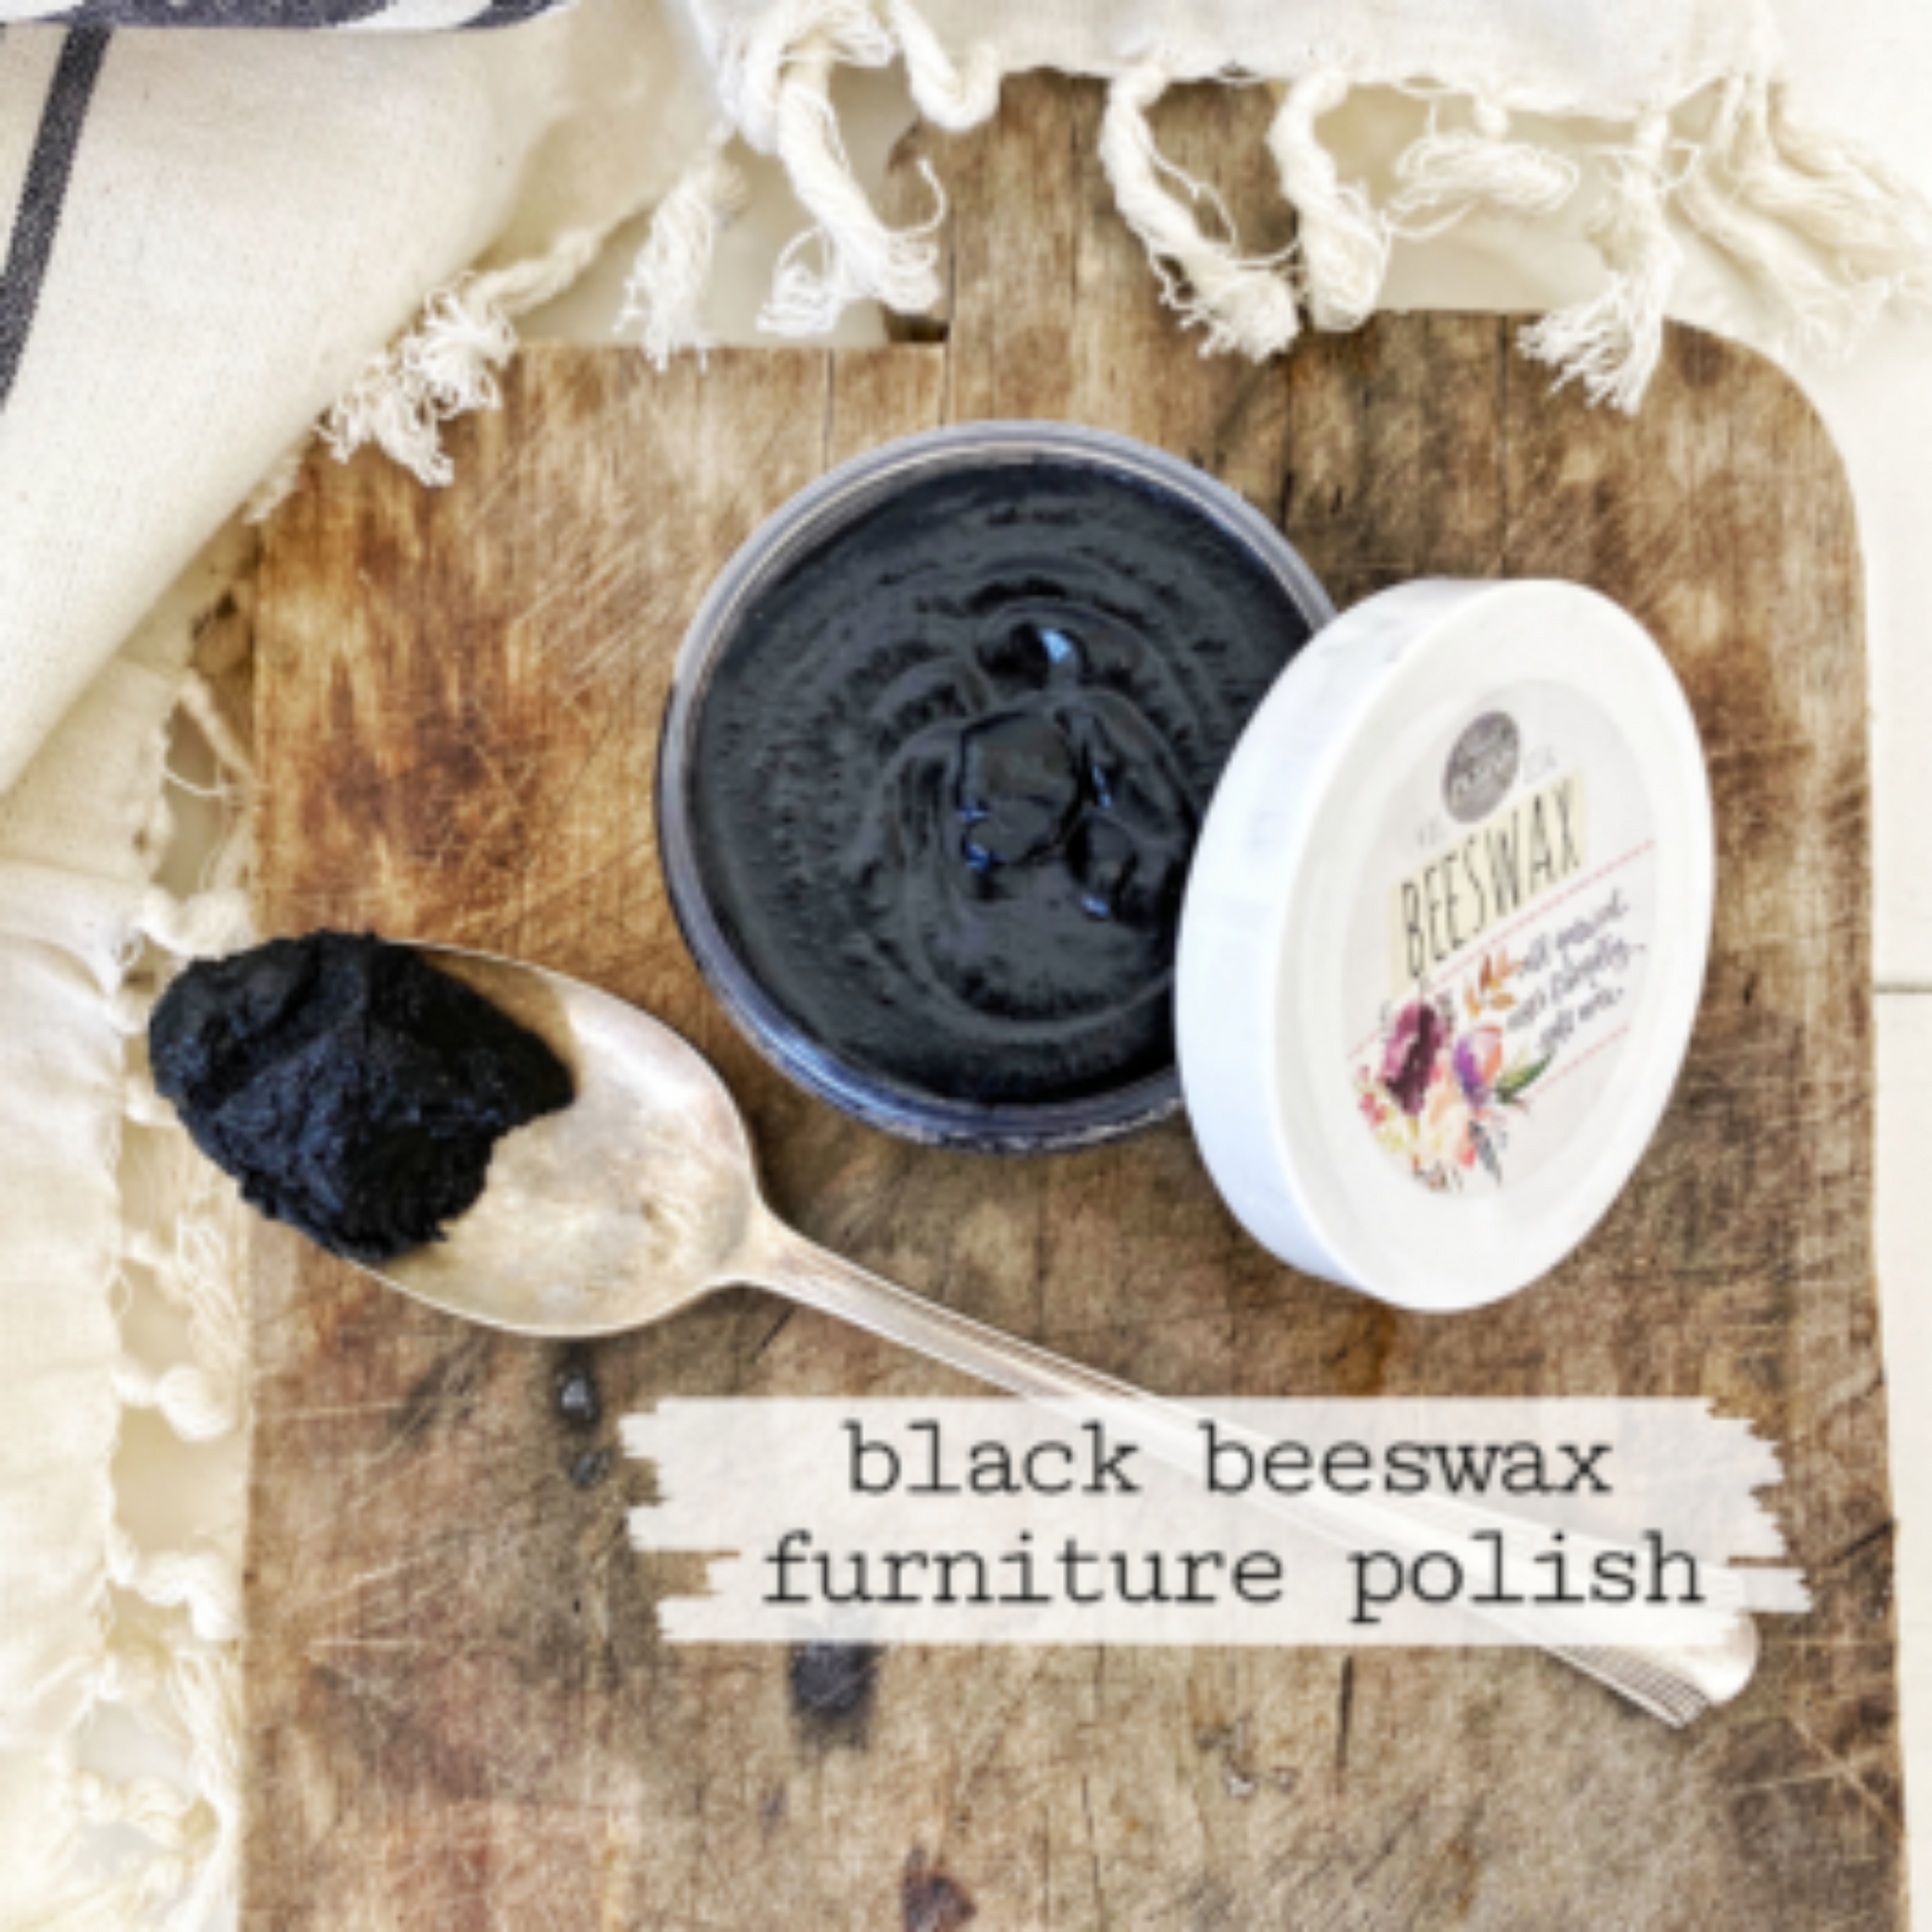 Product photo of Sweet Pickins Black Beeswax Furniture Polish available at Milton's Daughter